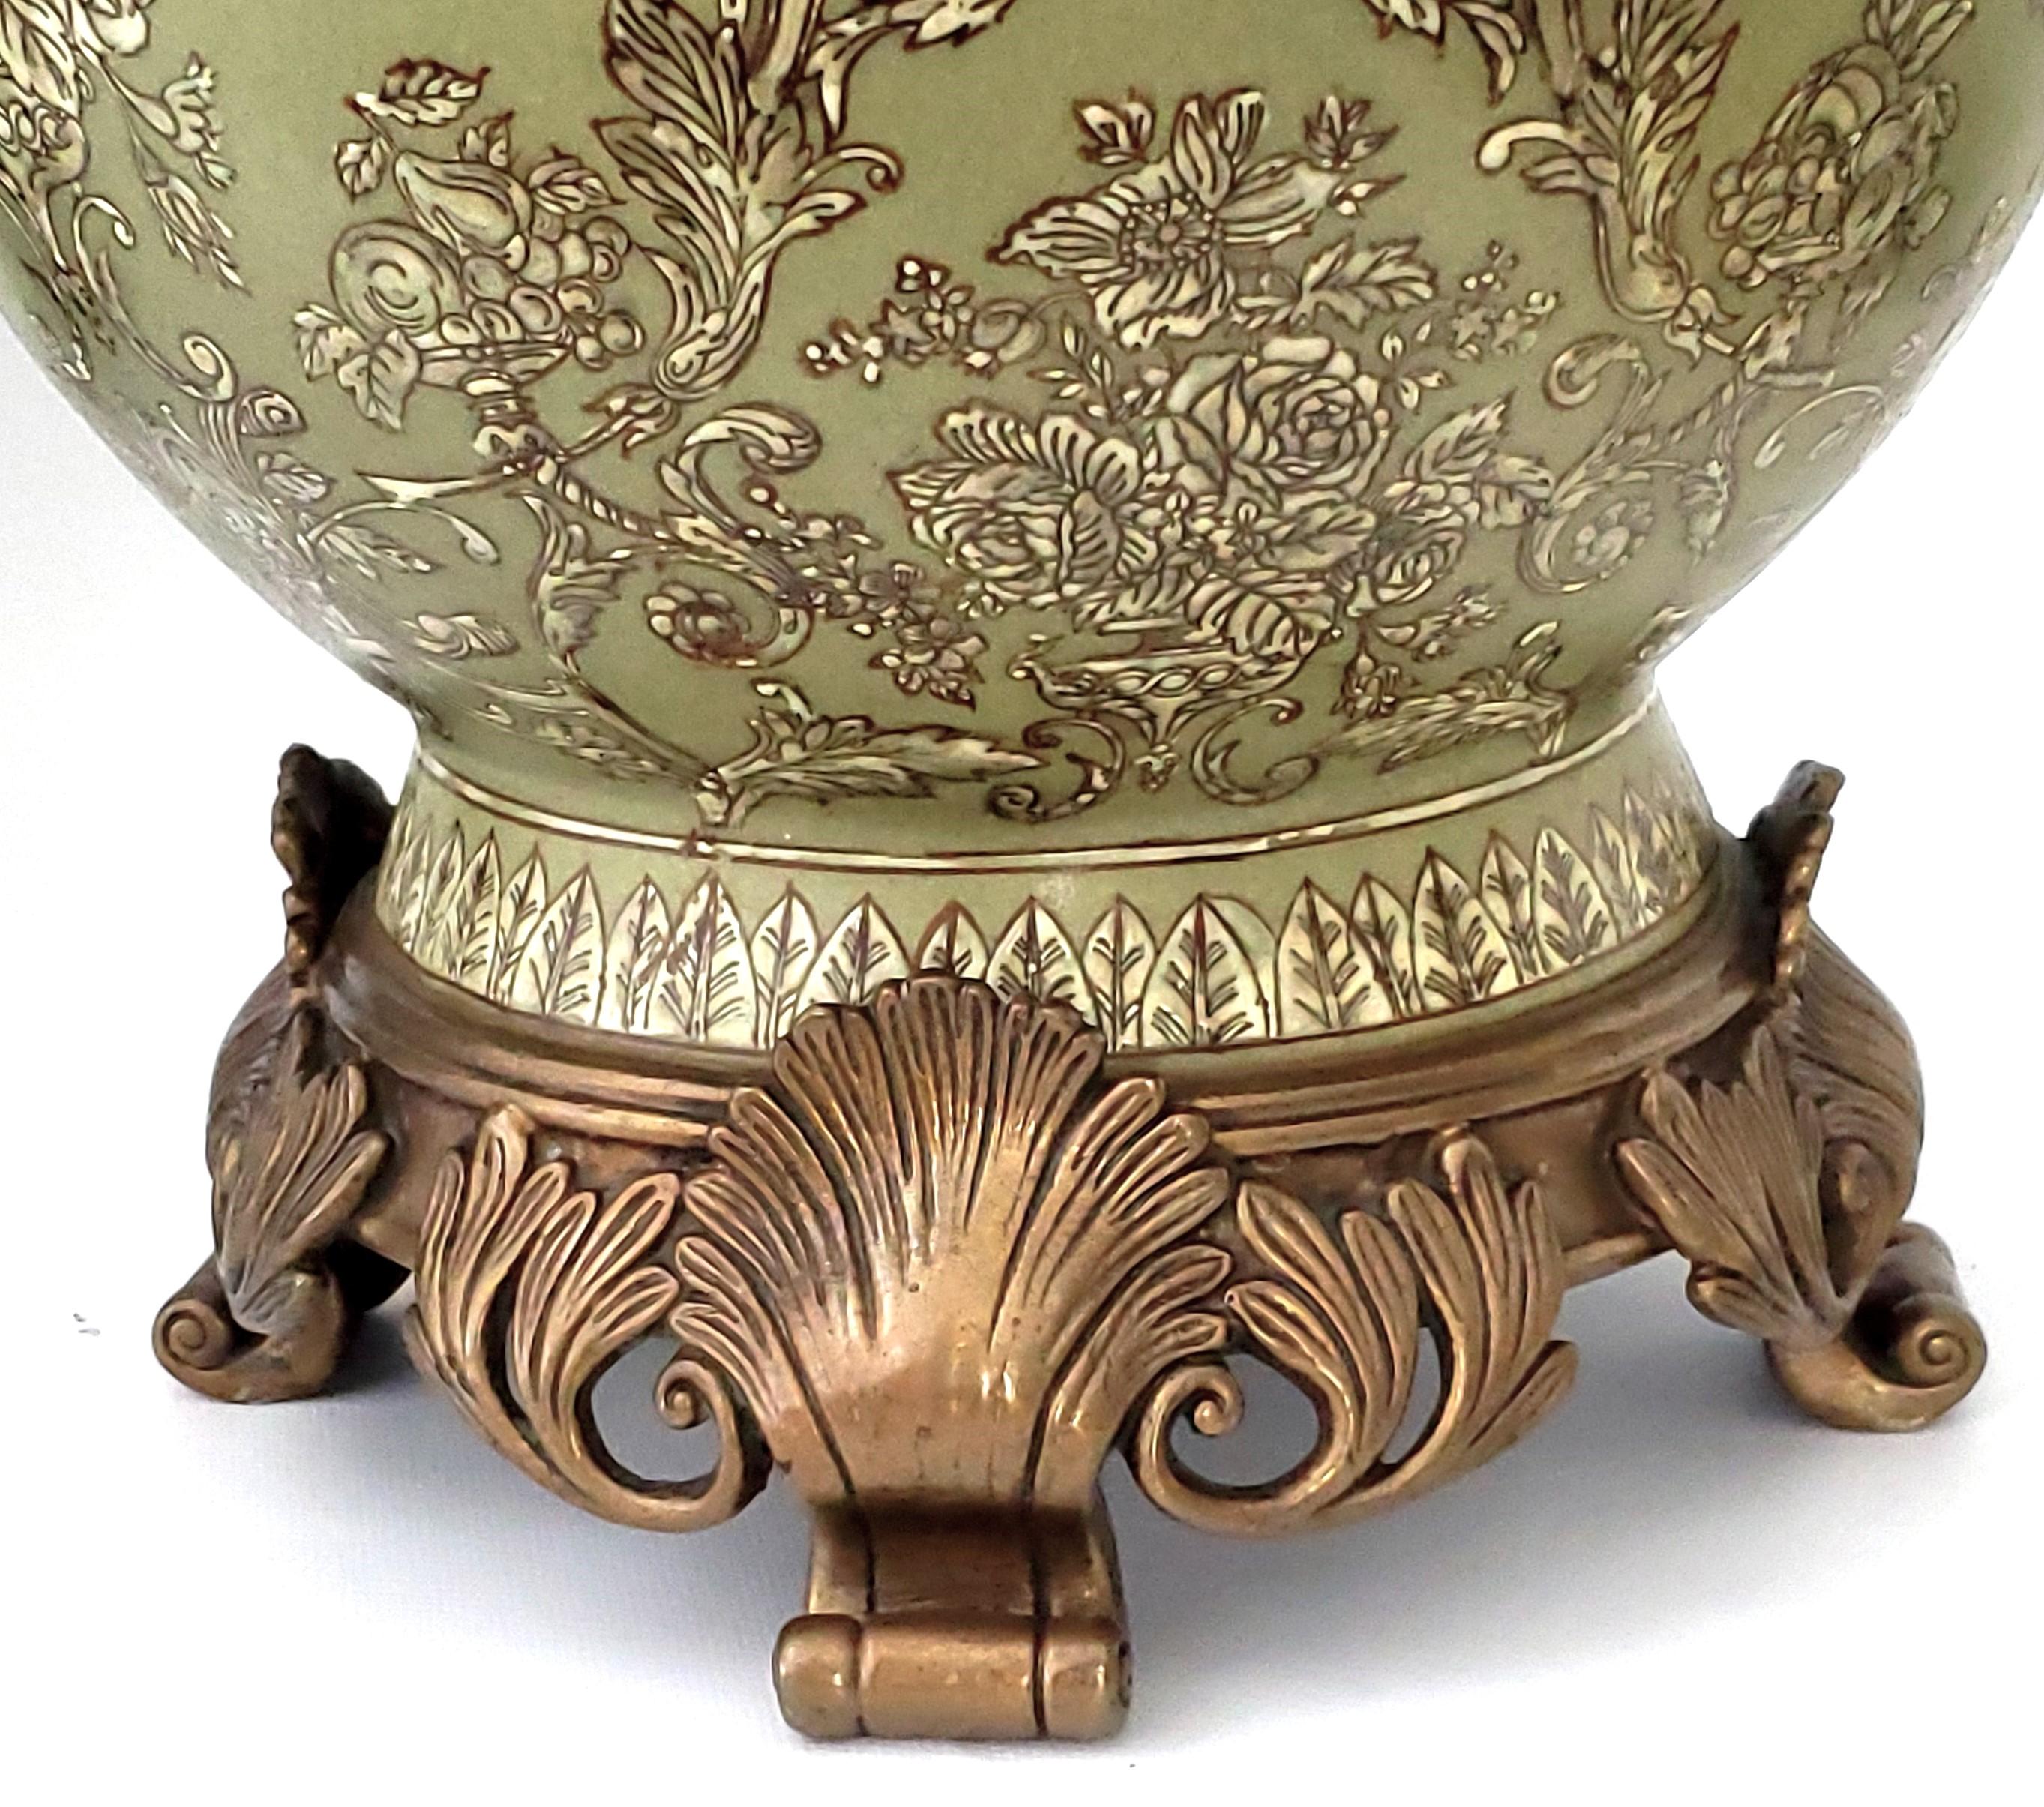 Louis XVI Style Ormolu and Chinese Porcelain Sage Green Urns or Vases - A Pair   For Sale 6